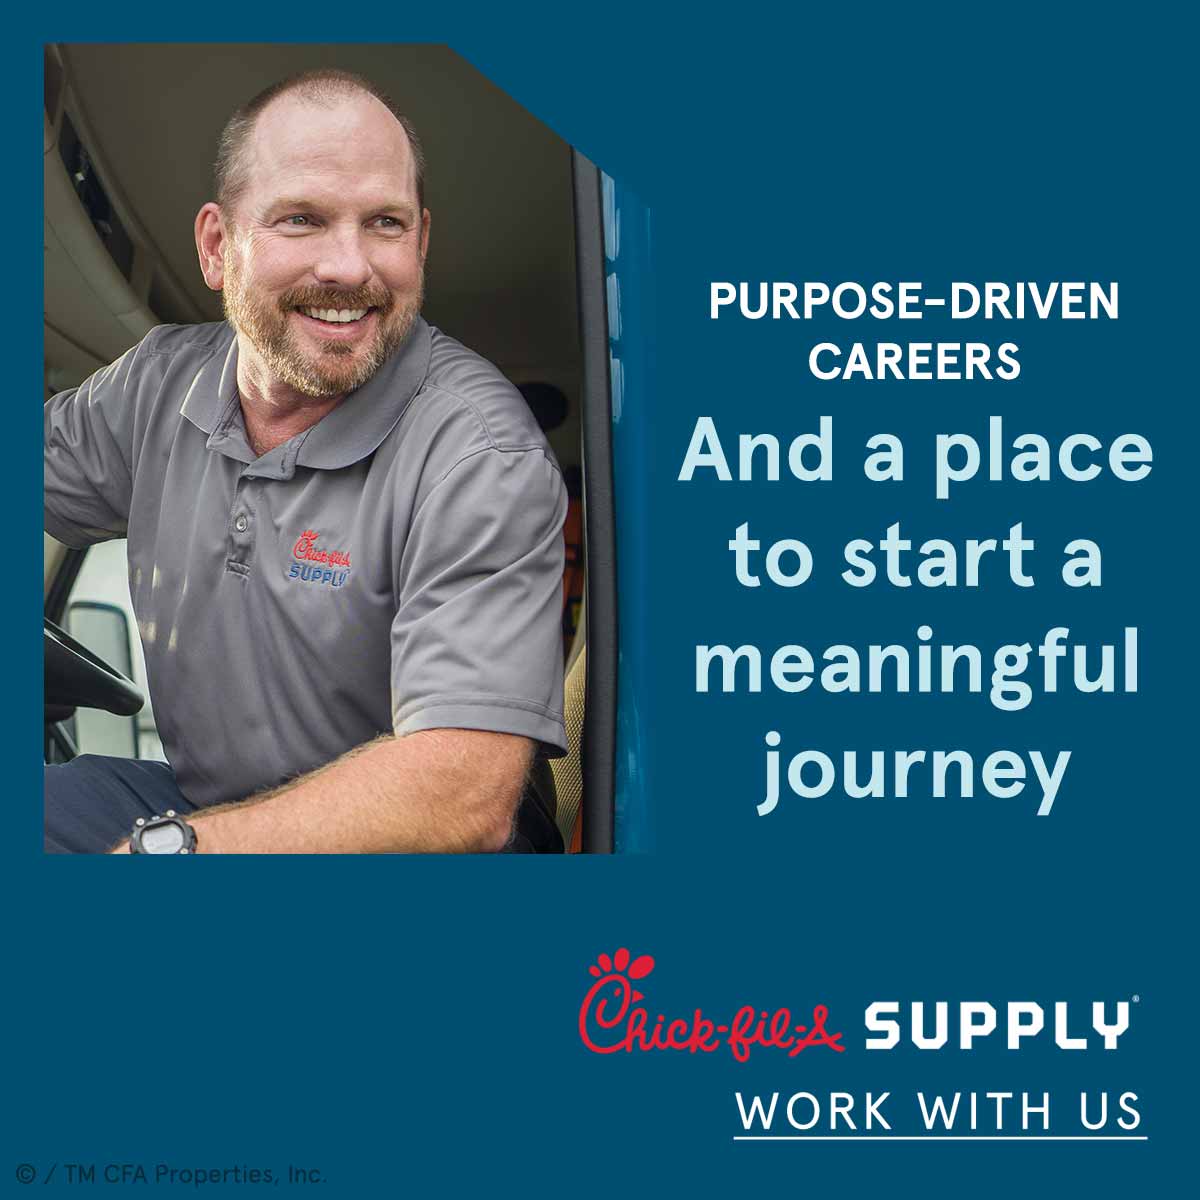 Purpose-driven careers and a place to start a meaningful journey - Chick-fil-A Supply. Learn more.